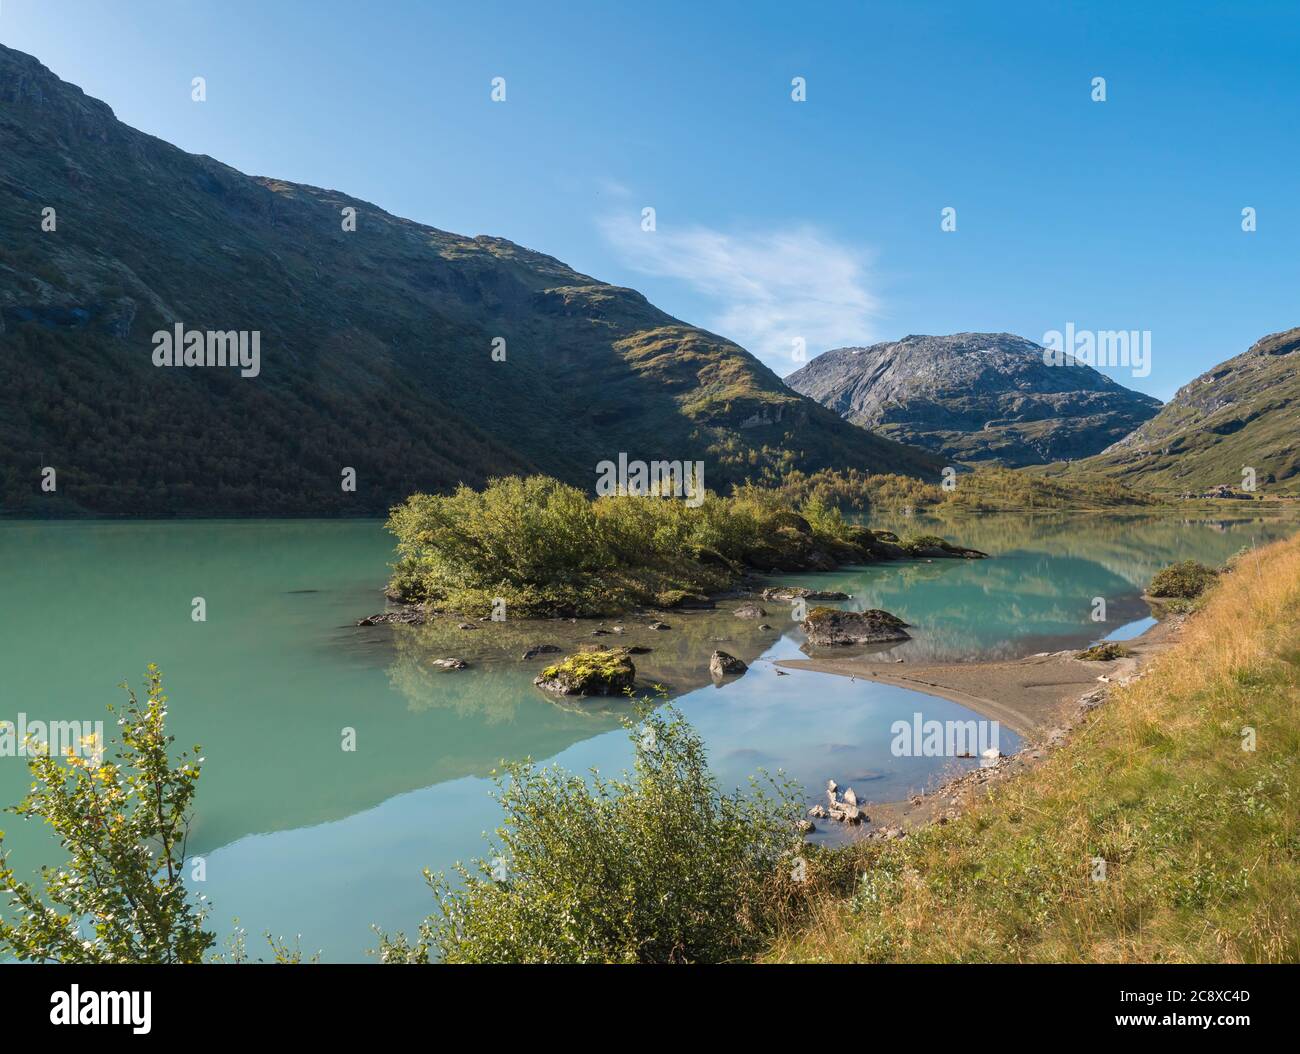 Milky blue glacial water of Lake Bovertunvatnet in the Jotunheimen National Park, Norway. Early autumn blue sky background. Stock Photo